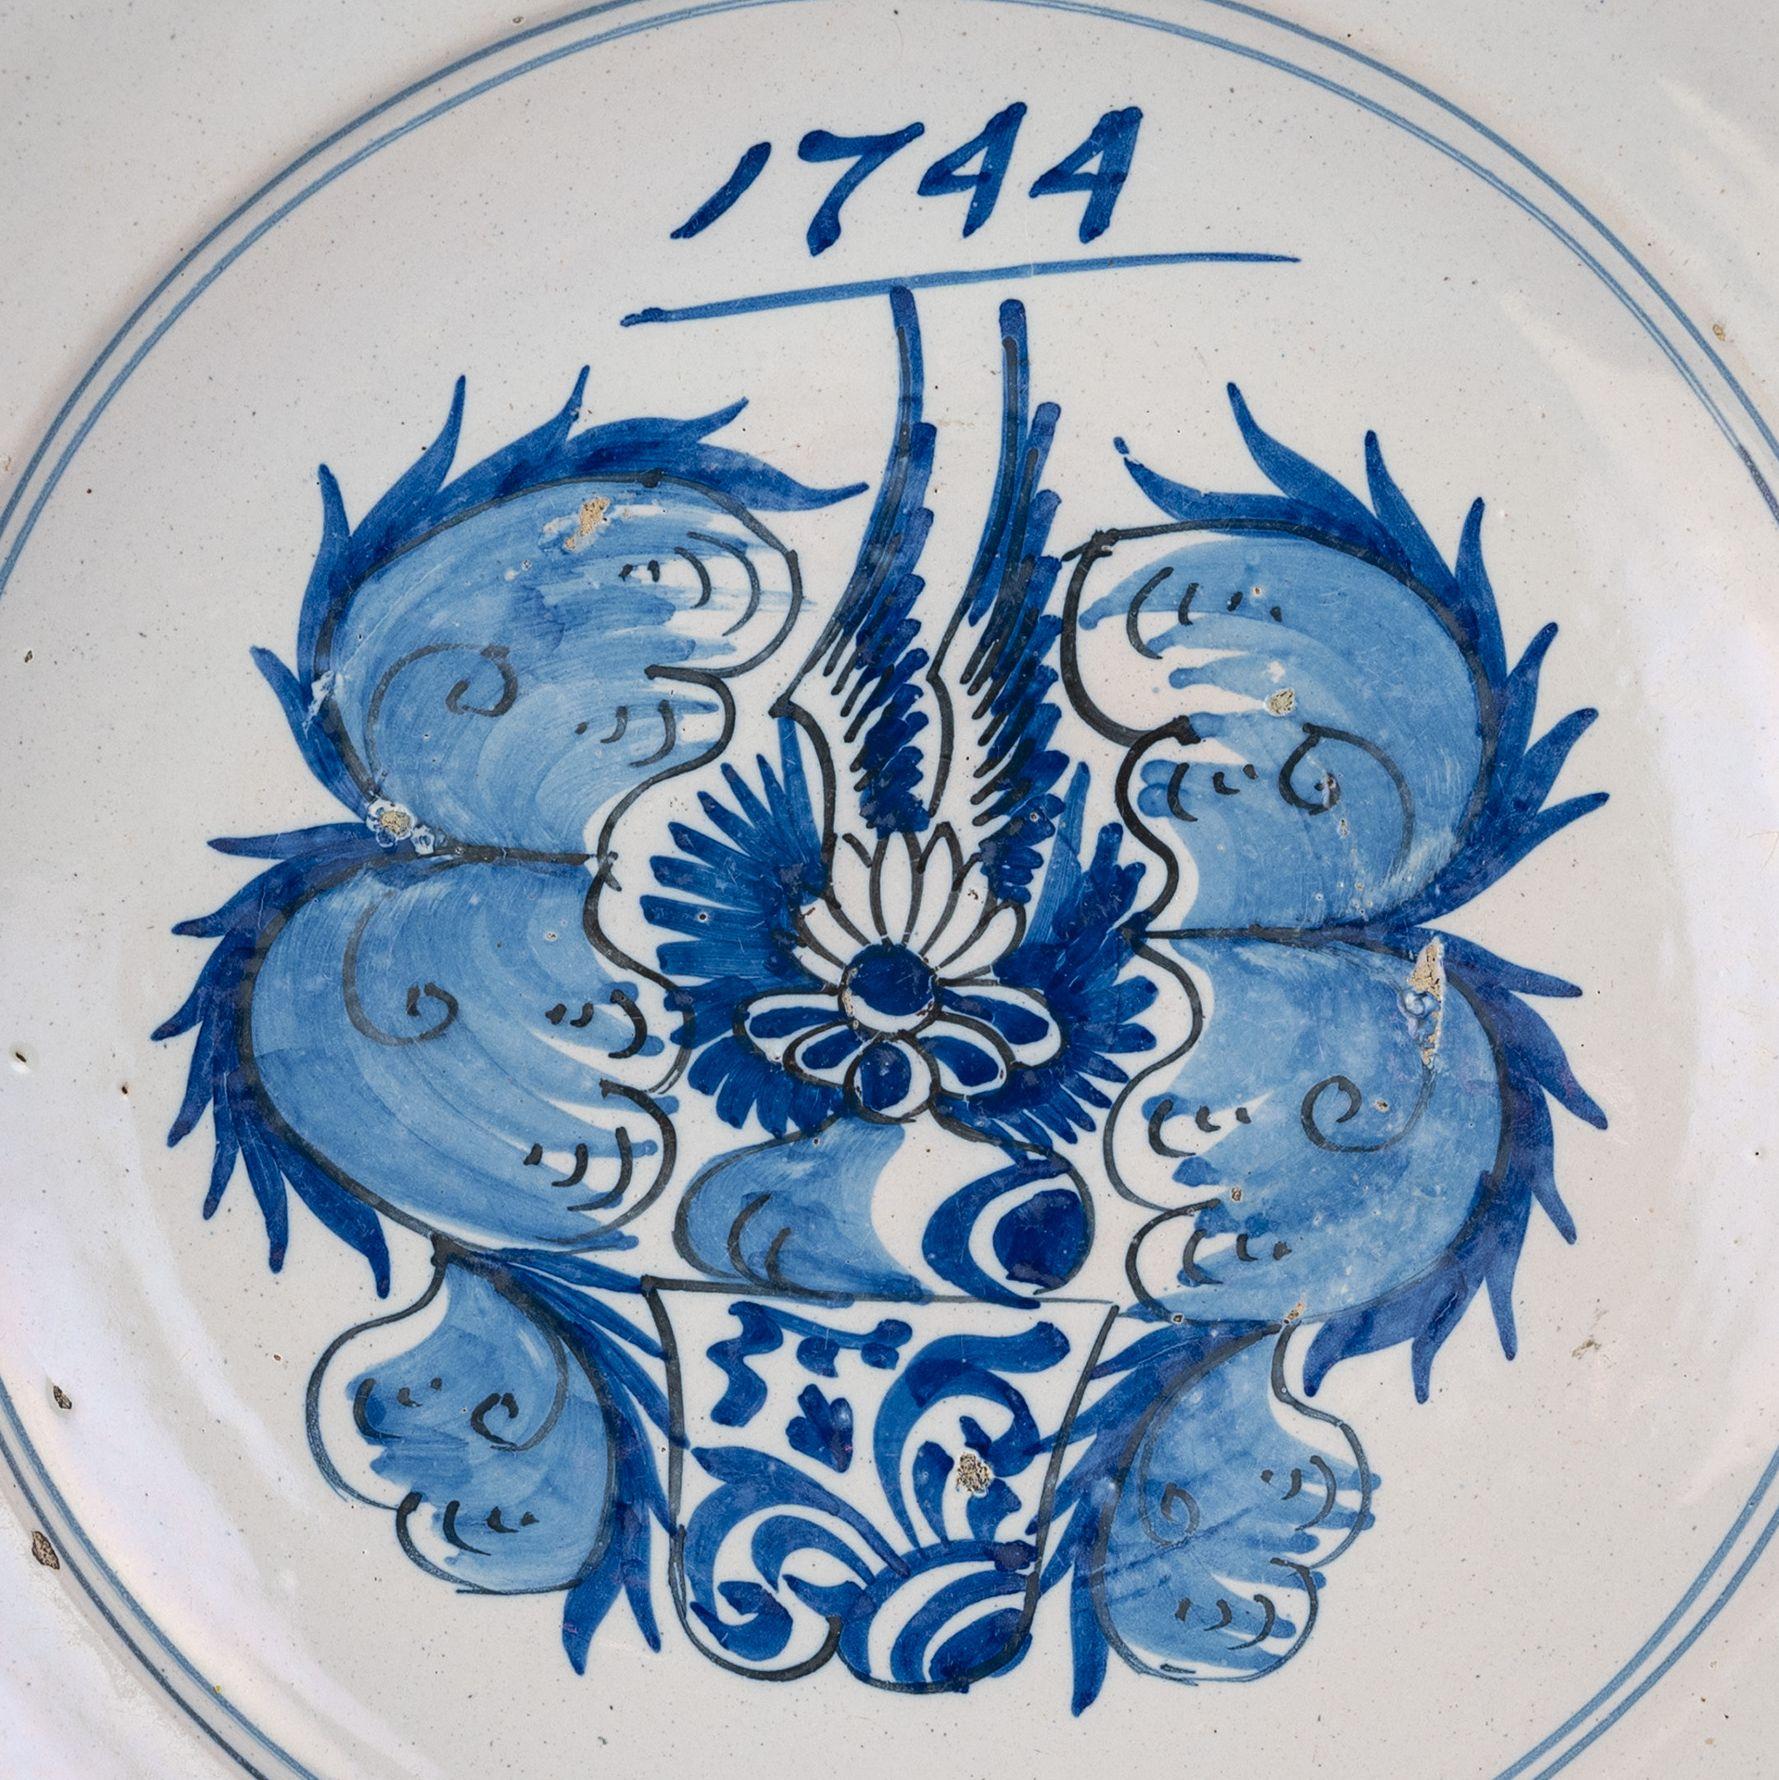 Baroque Delft Blue and White Armorial Majolica Dish, Harlingen, Dated 1744 For Sale